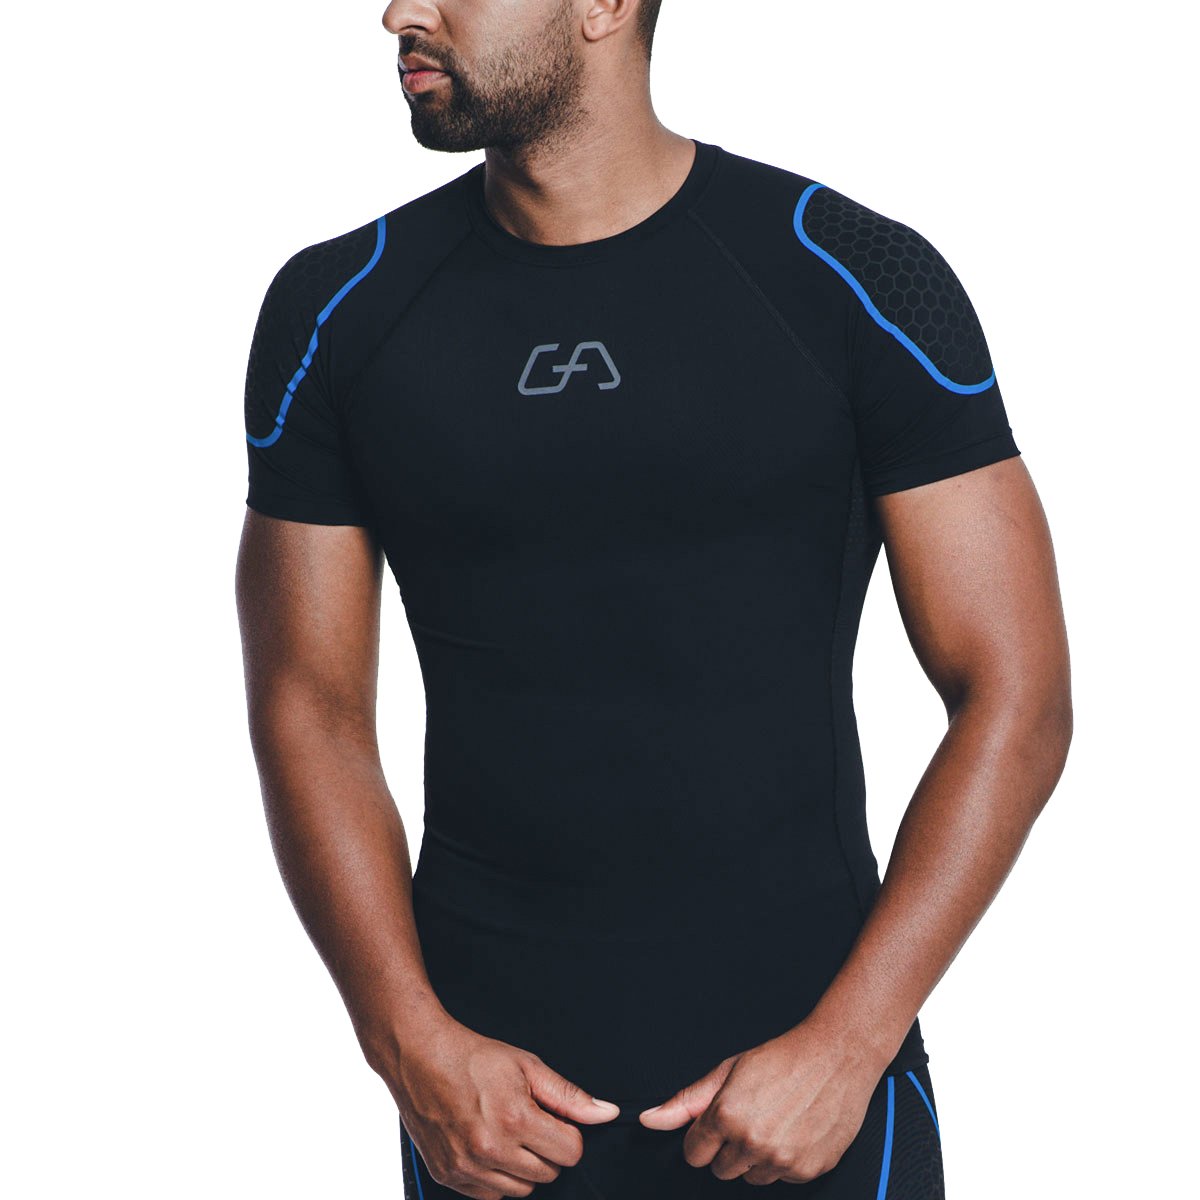 Men Gym Wear T-Shirt at Rs 115/piece in Asansol